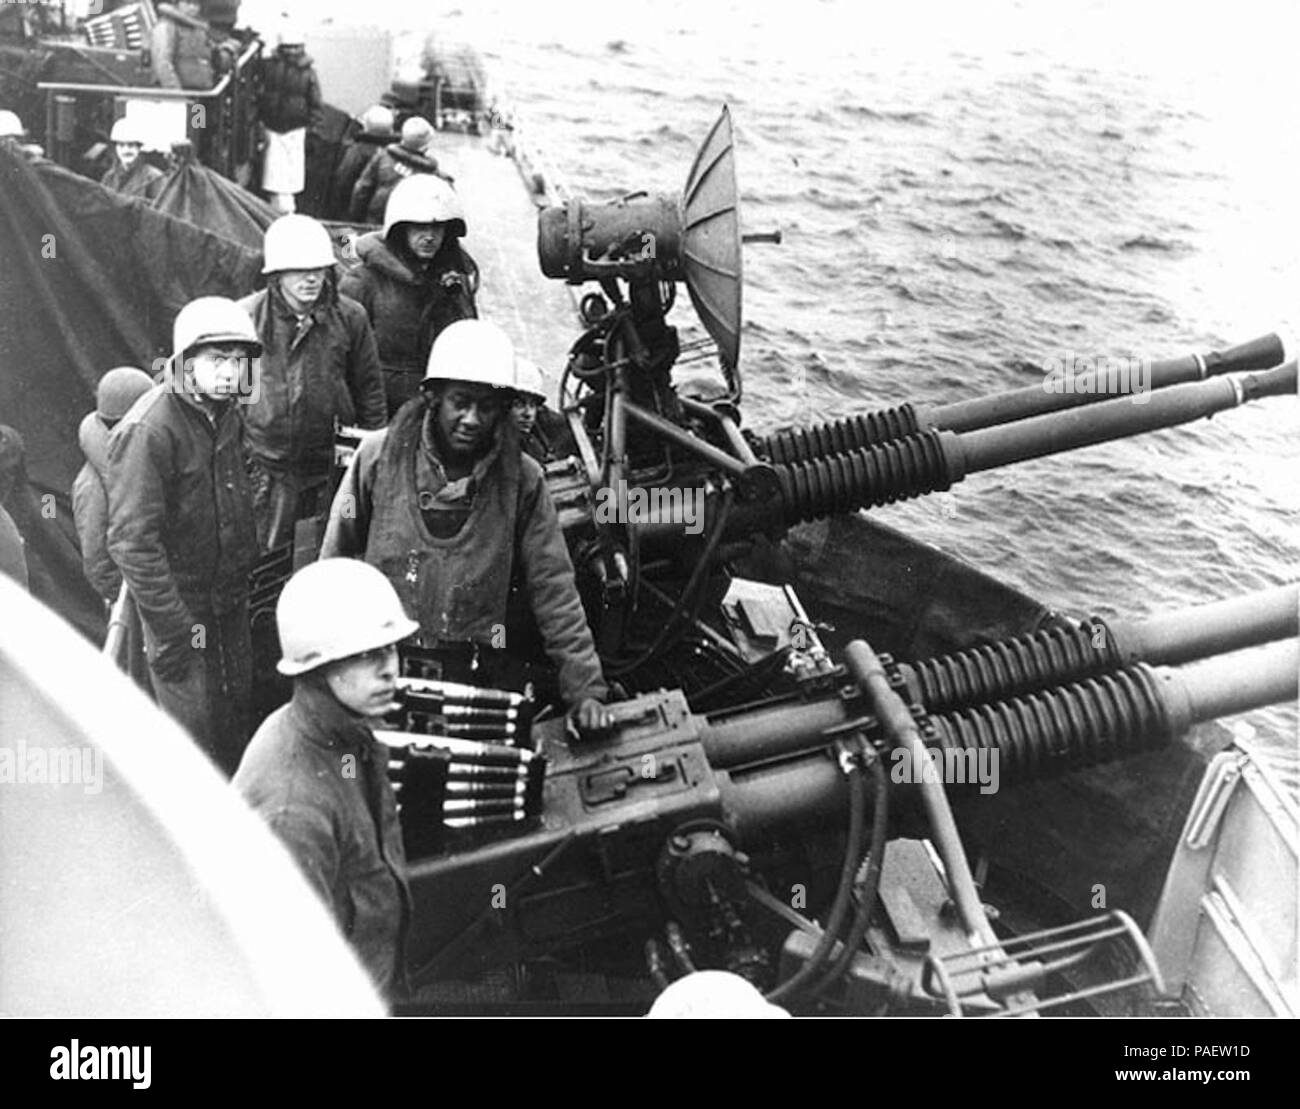 USS English (DD-696): a 40mm gun crew prepares to bombard enemy installations along the Korean coast, circa October 1950 - February 1951. Photograph was received by the Naval Photographic Center on 21 February 1951. Note radar antenna on this quad 40mm mount and ammunition loaded in guns. Another 40mm mount, pointed in the opposite direction, is in the upper left background. Stock Photo